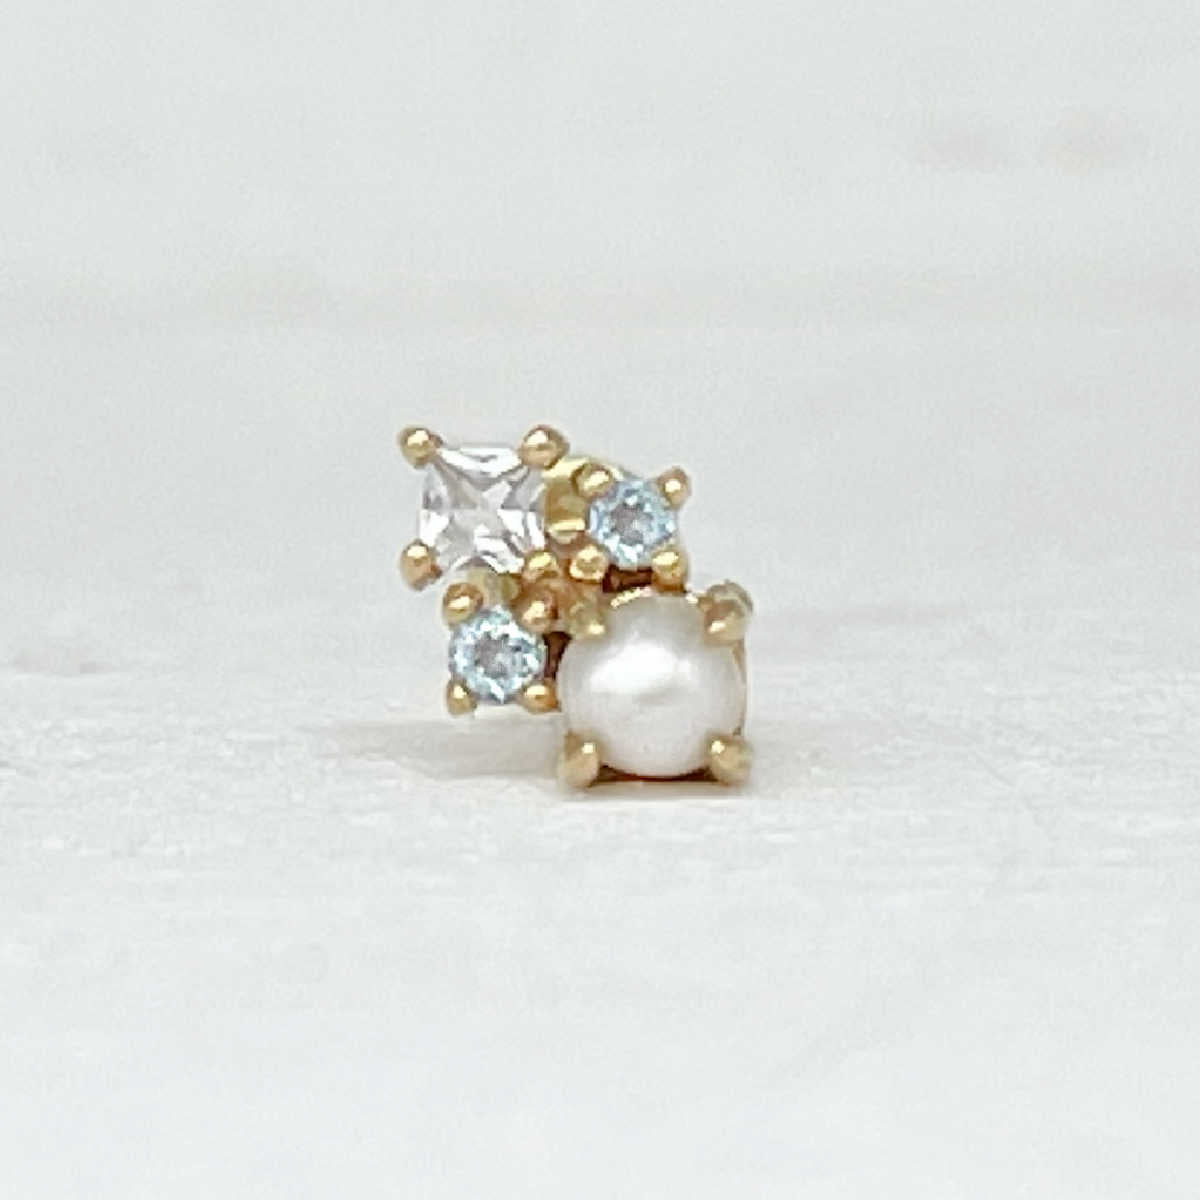 Pearl Stud Earrings with Blue Topaz | 14k Gold Cartilage Studs from Two of Most